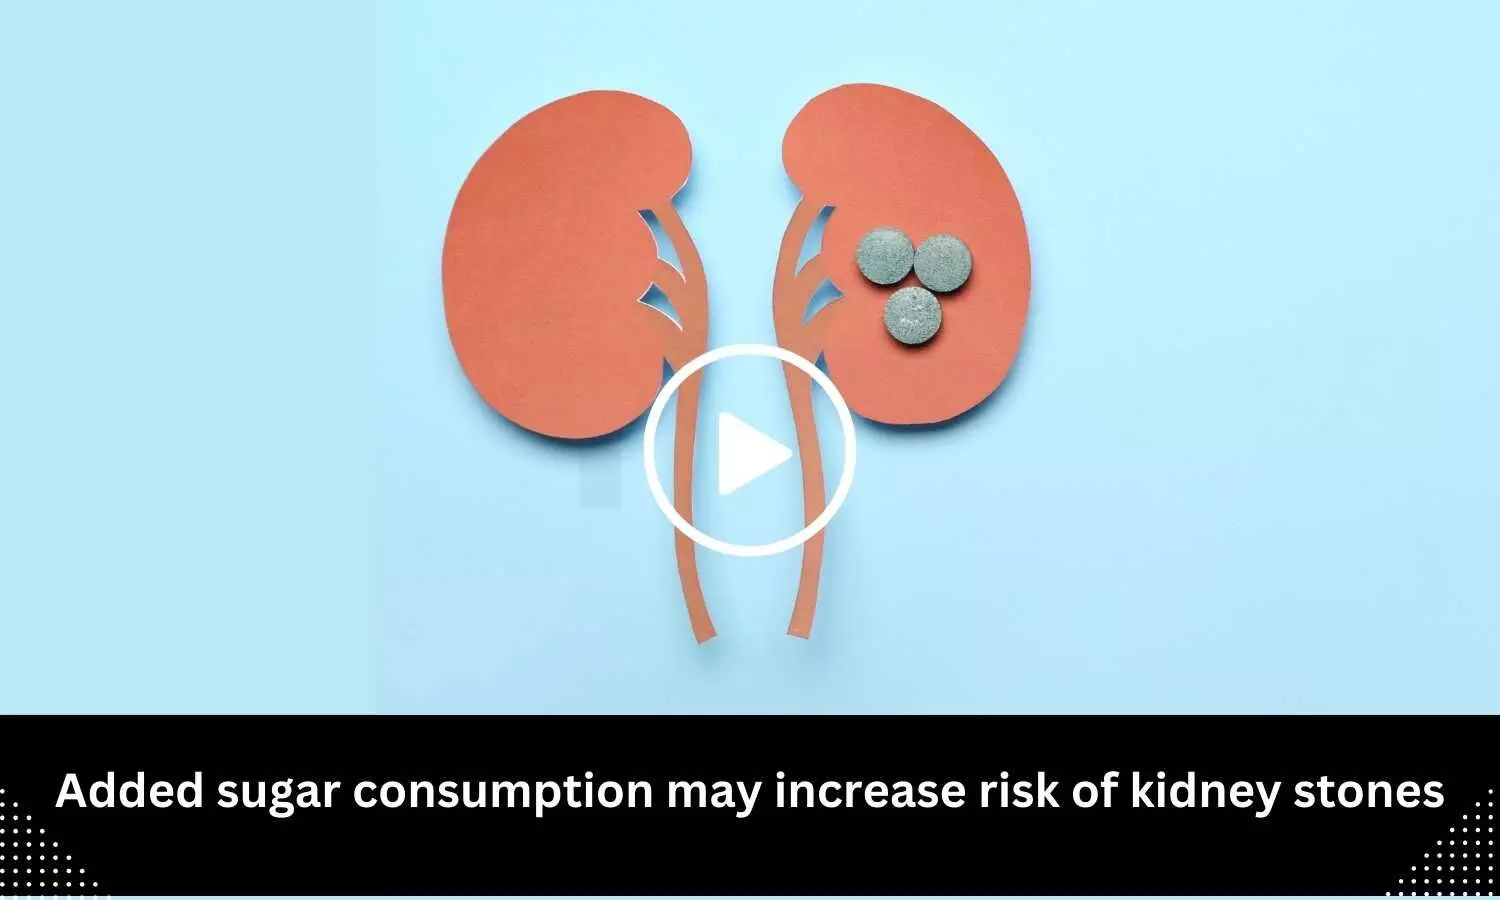 Added sugar consumption may increase risk of kidney stones